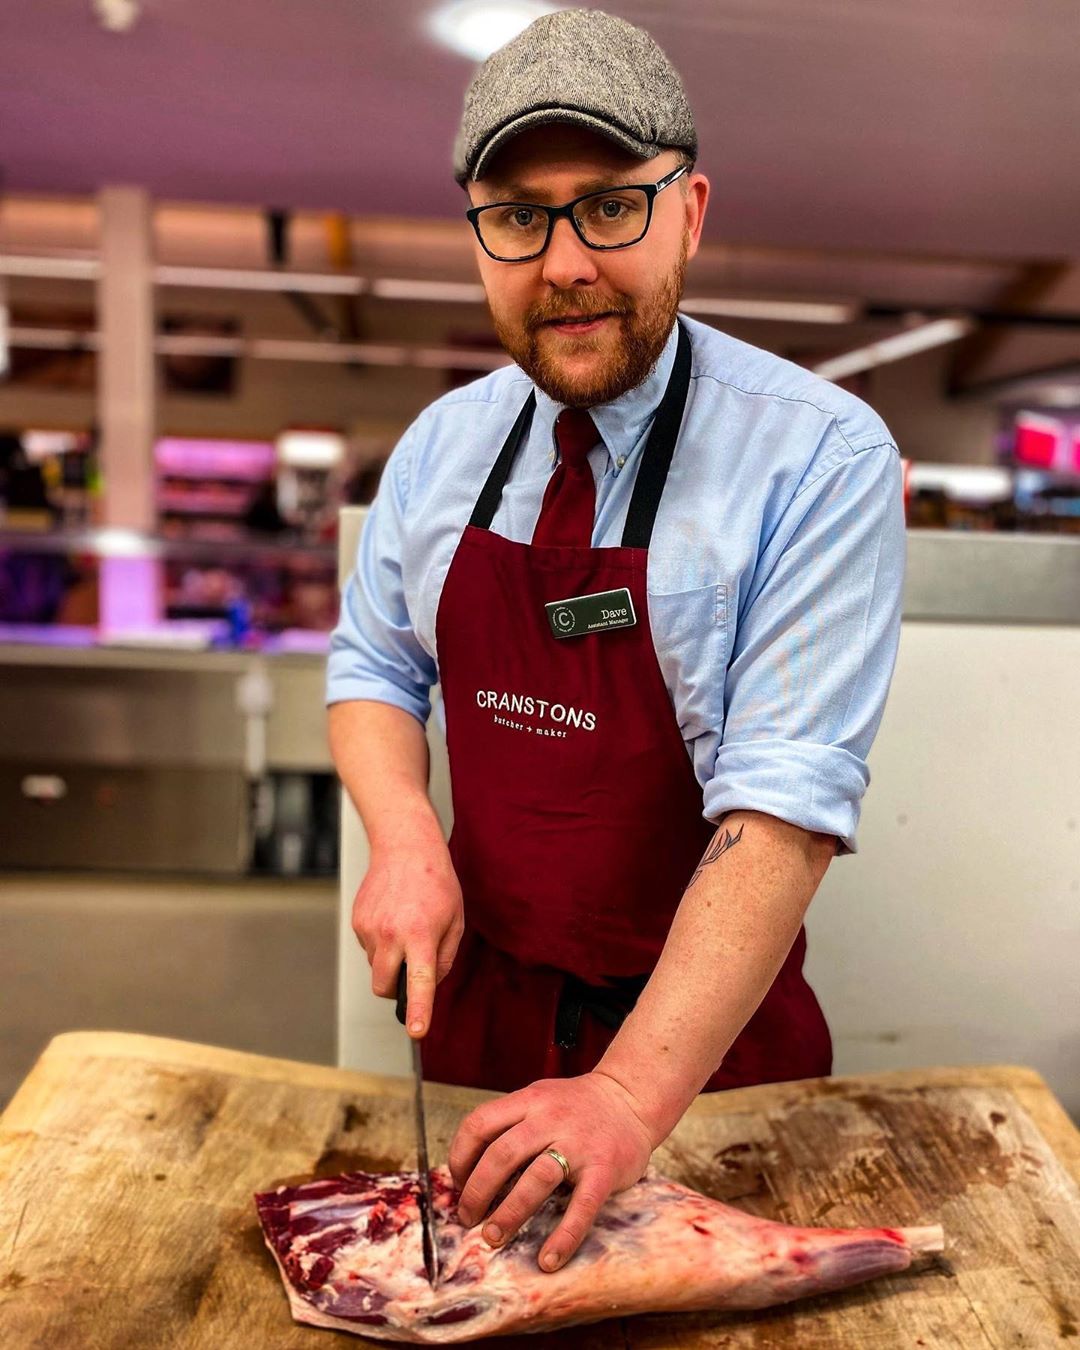 You’ll recognise Dave if you’re a regular at our Brampton Food Hall, but he’s just joined our team at the Cumbrian Food Hall as Assistant Manager, so we thought it was best we introduce him to you all! 😄🥩🔪 http://cranstons.net/say-hello-to-dave-dobson/